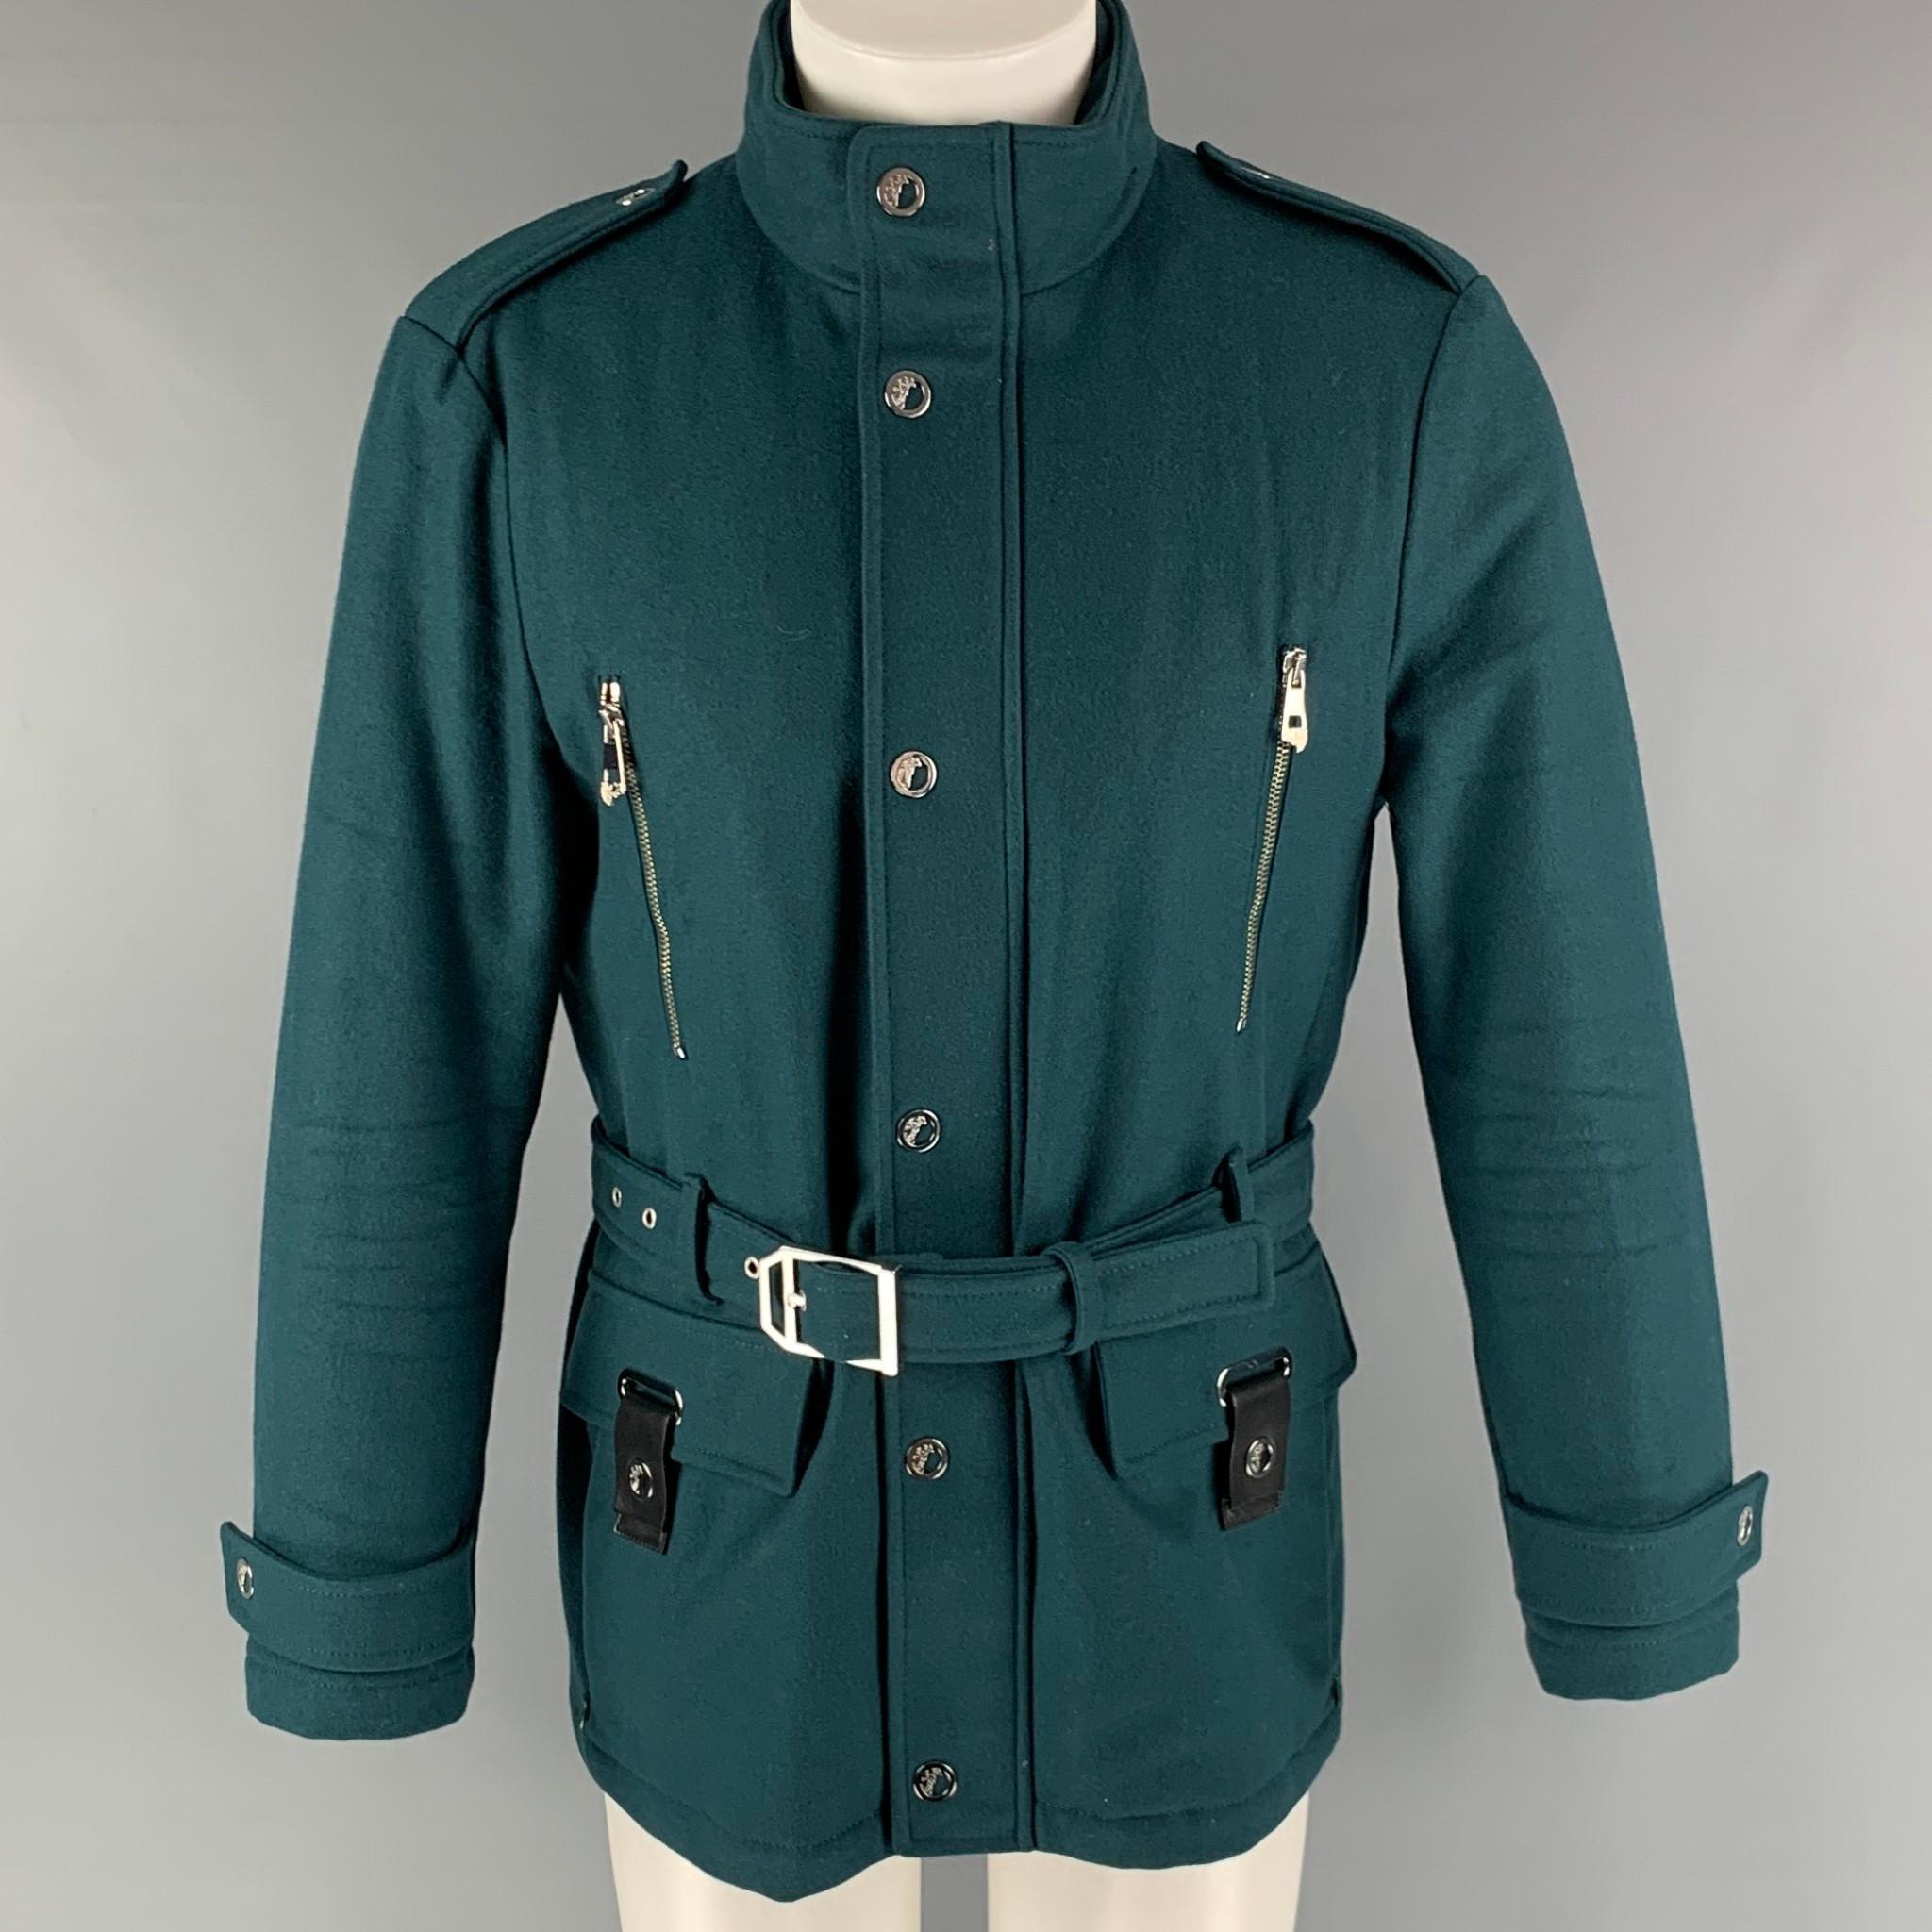 VERSACE COLLECTION jacket comes in a green wool blend woven material featuring a belted style, flap pockets, epaulets, hidden hood, silver medusa hardware, and a zip up and snap button closure.

Excellent Pre-Owned Condition.
Marked: IT